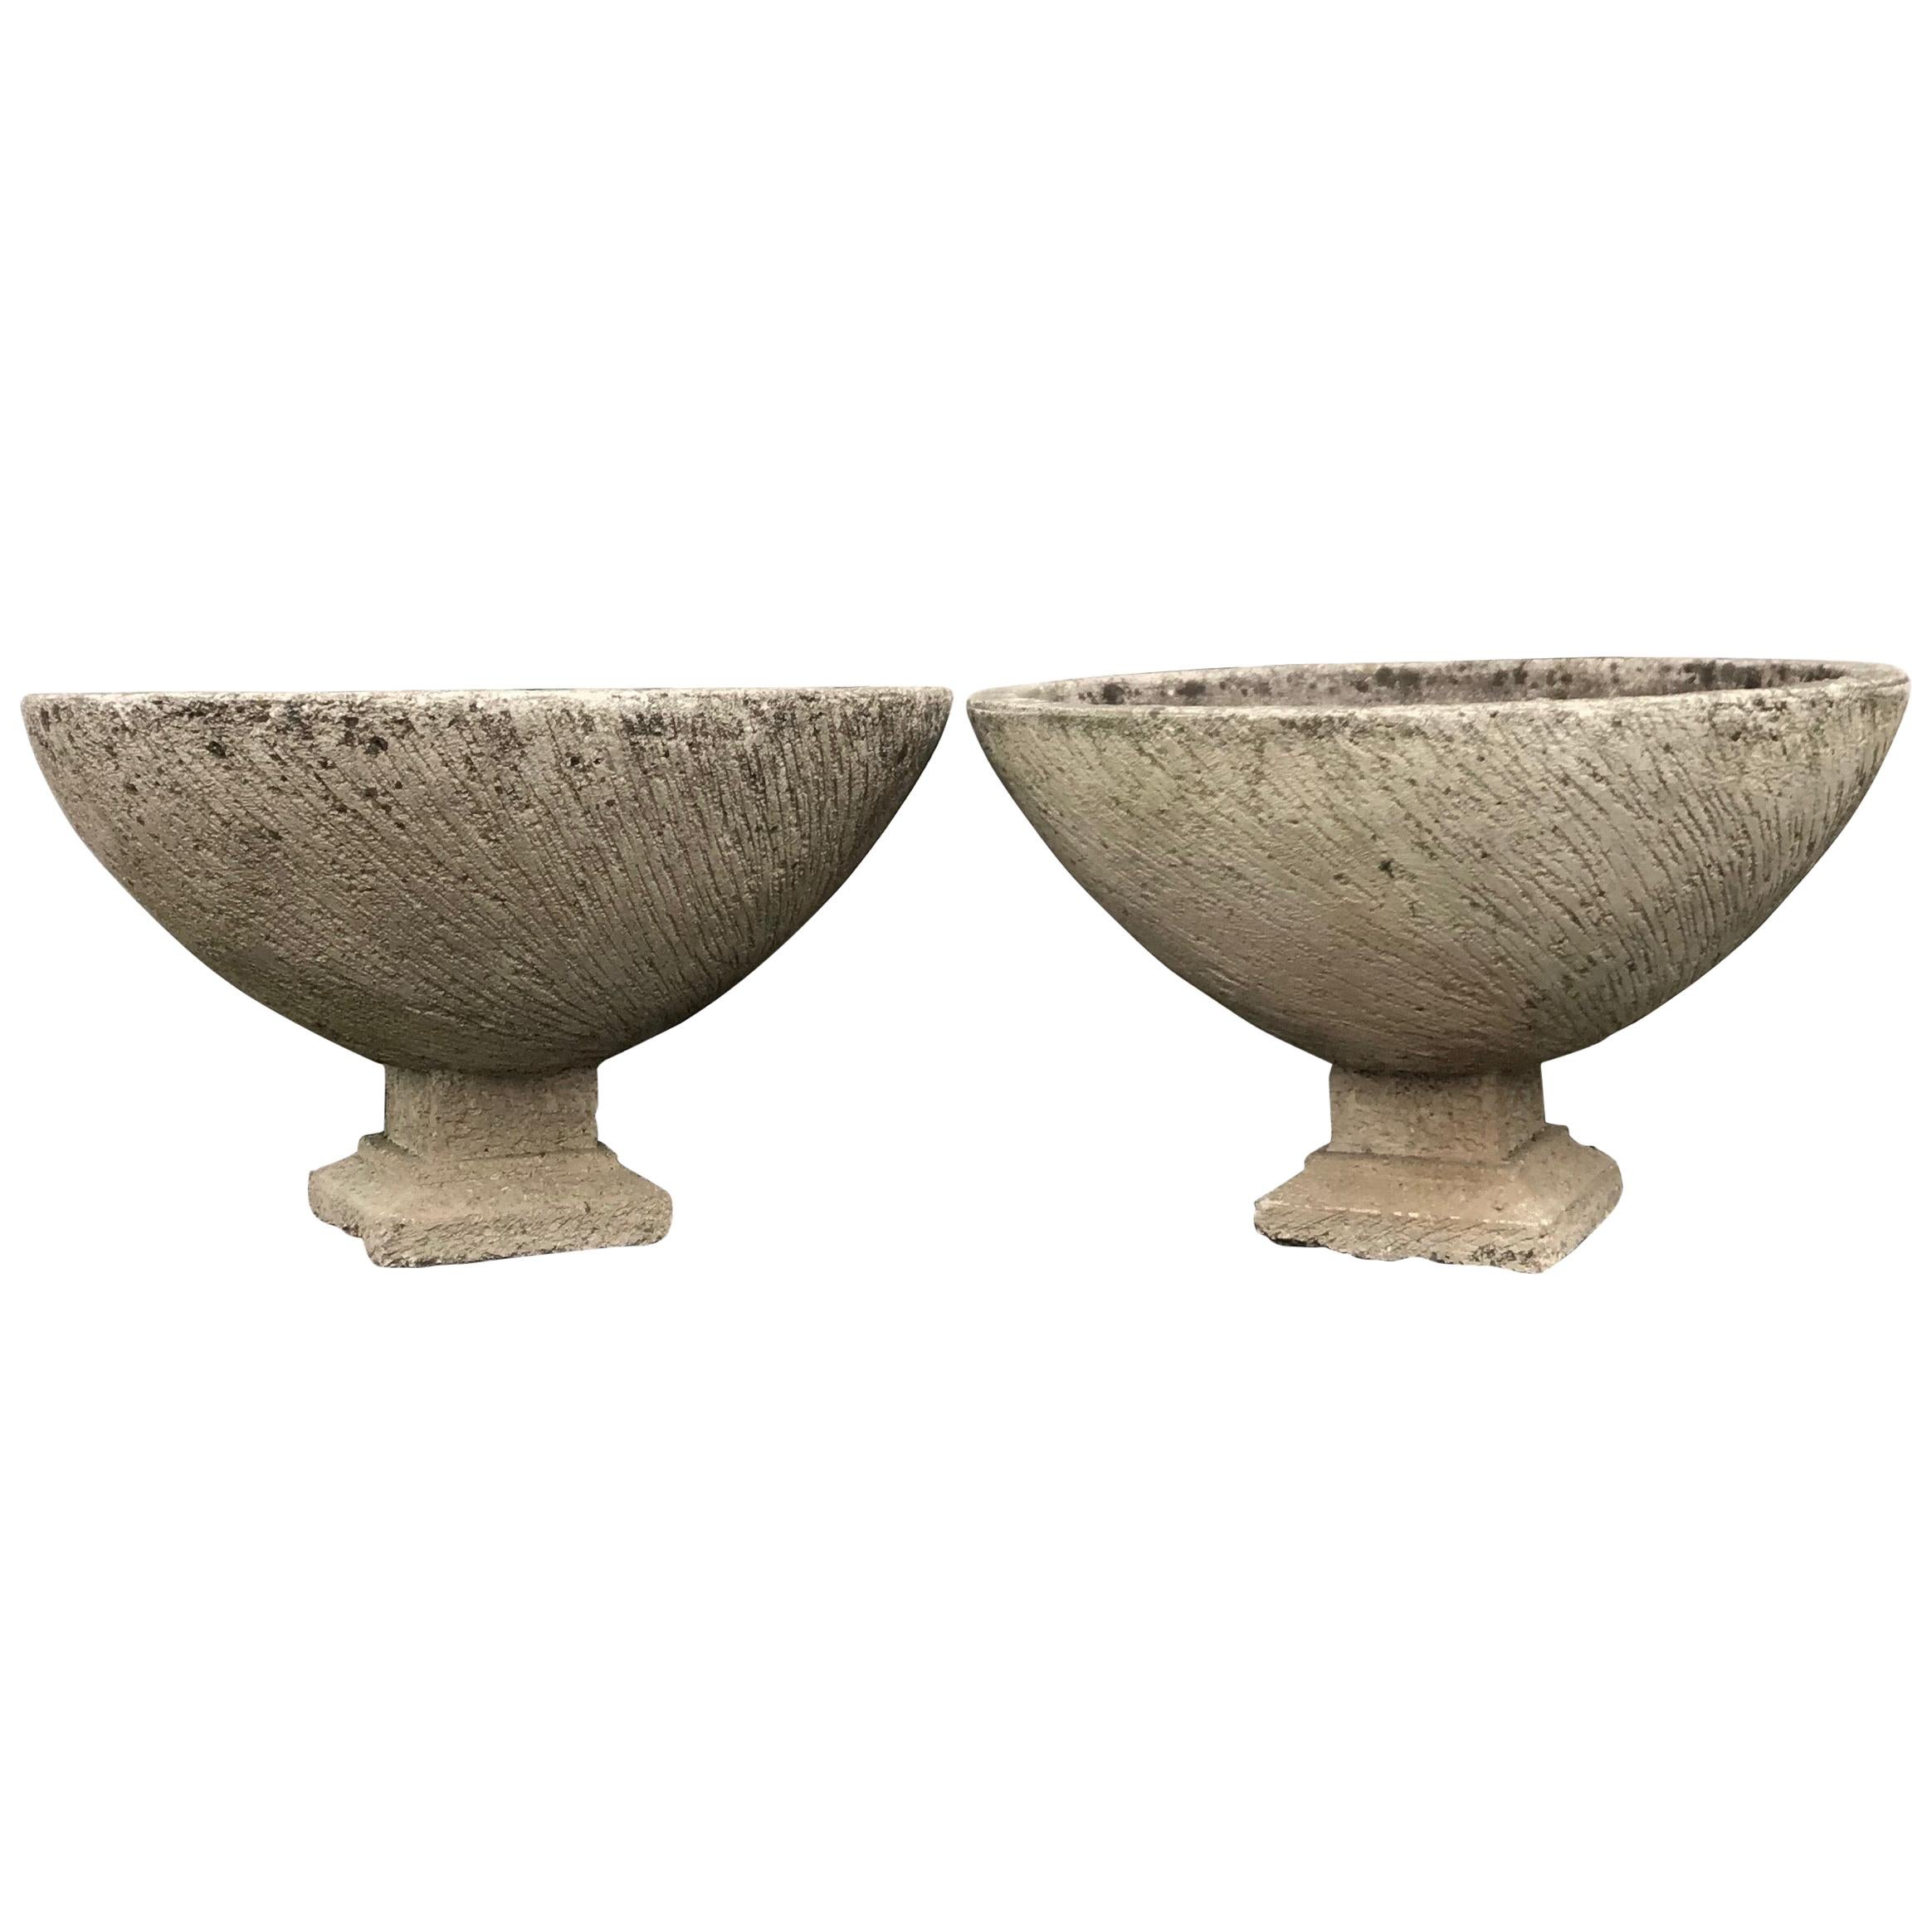 Pair of Large Round French Cast Stone Bowl Planters on Integral Feet #1